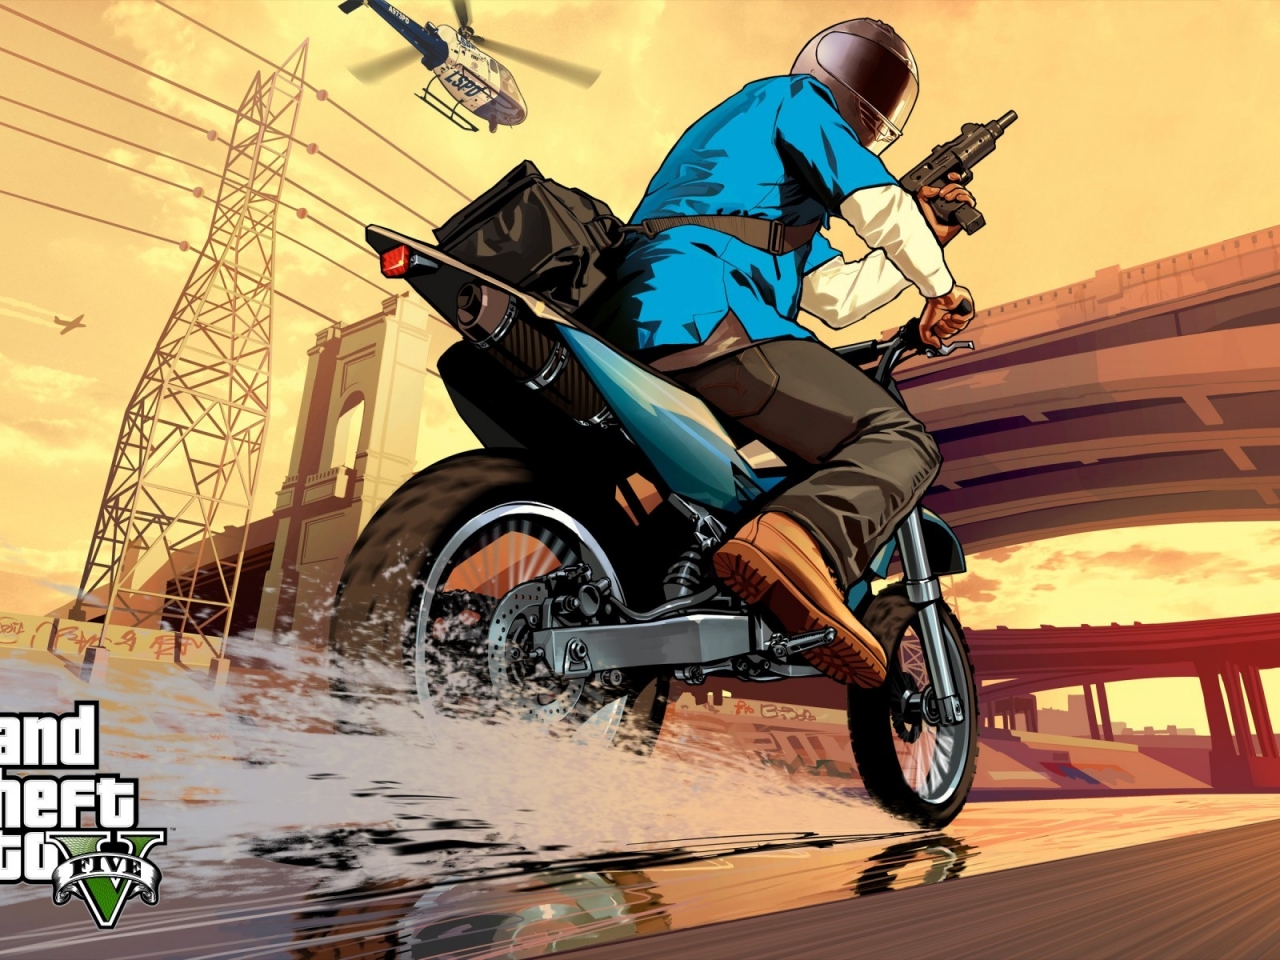 Grand Theft Auto V Poster for 1280 x 960 resolution